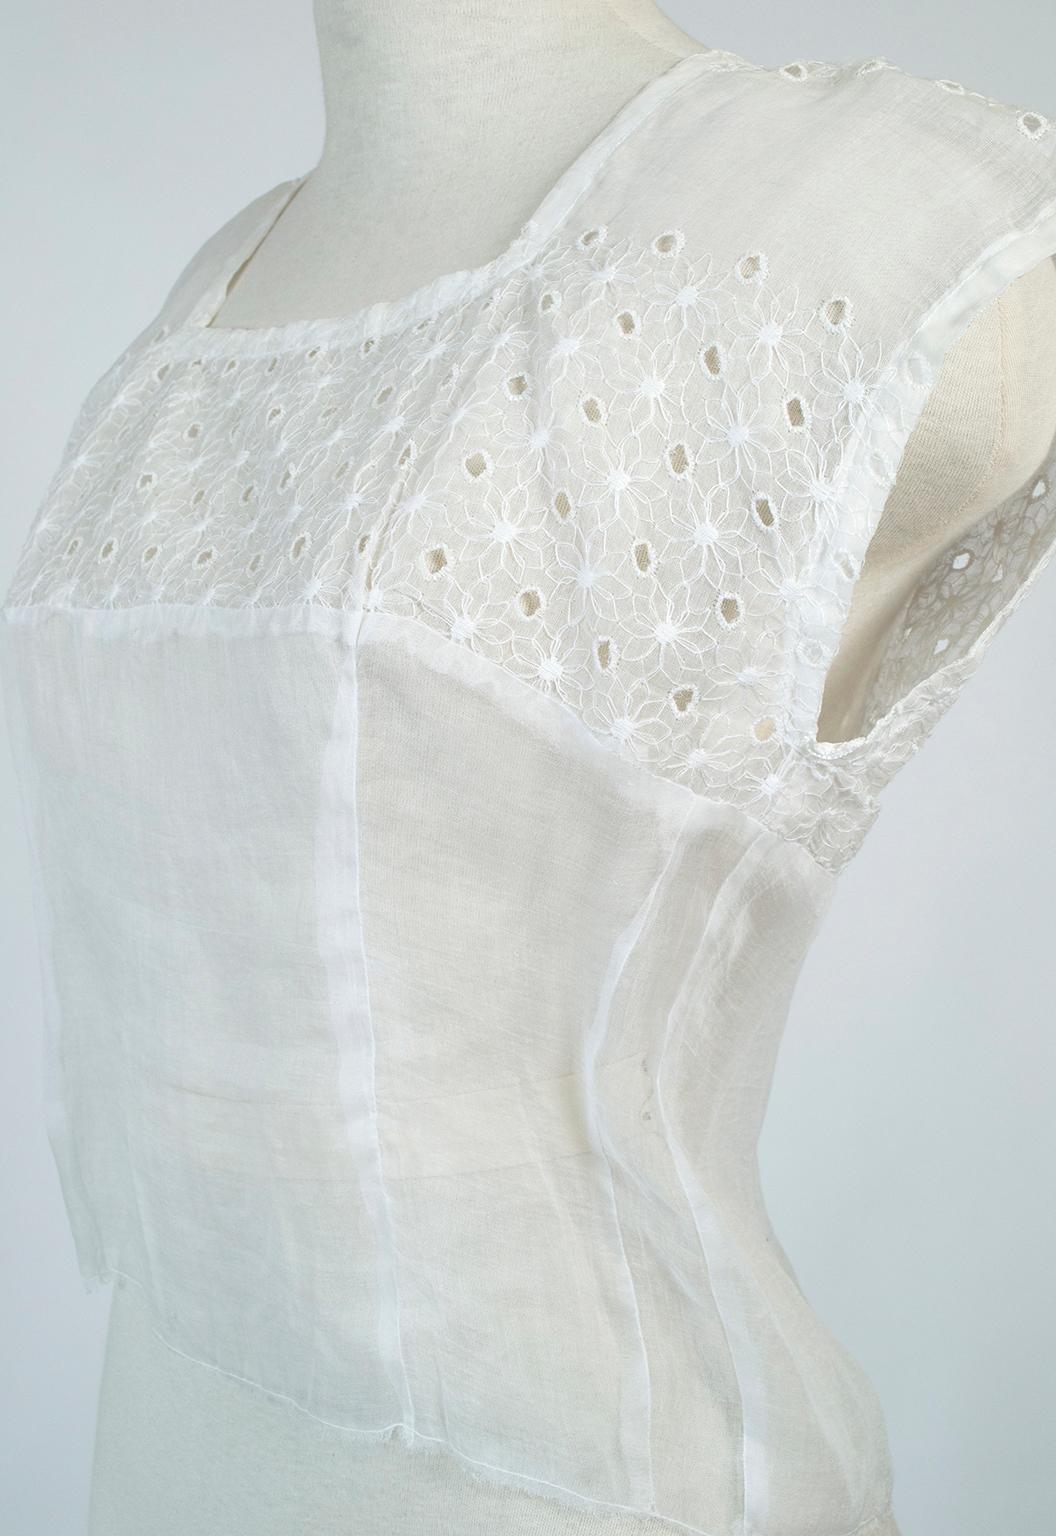 Edwardian Sheer White Organdy Eyelet Cap Sleeve Blouse w Square Neck  – S, 1910s For Sale 2